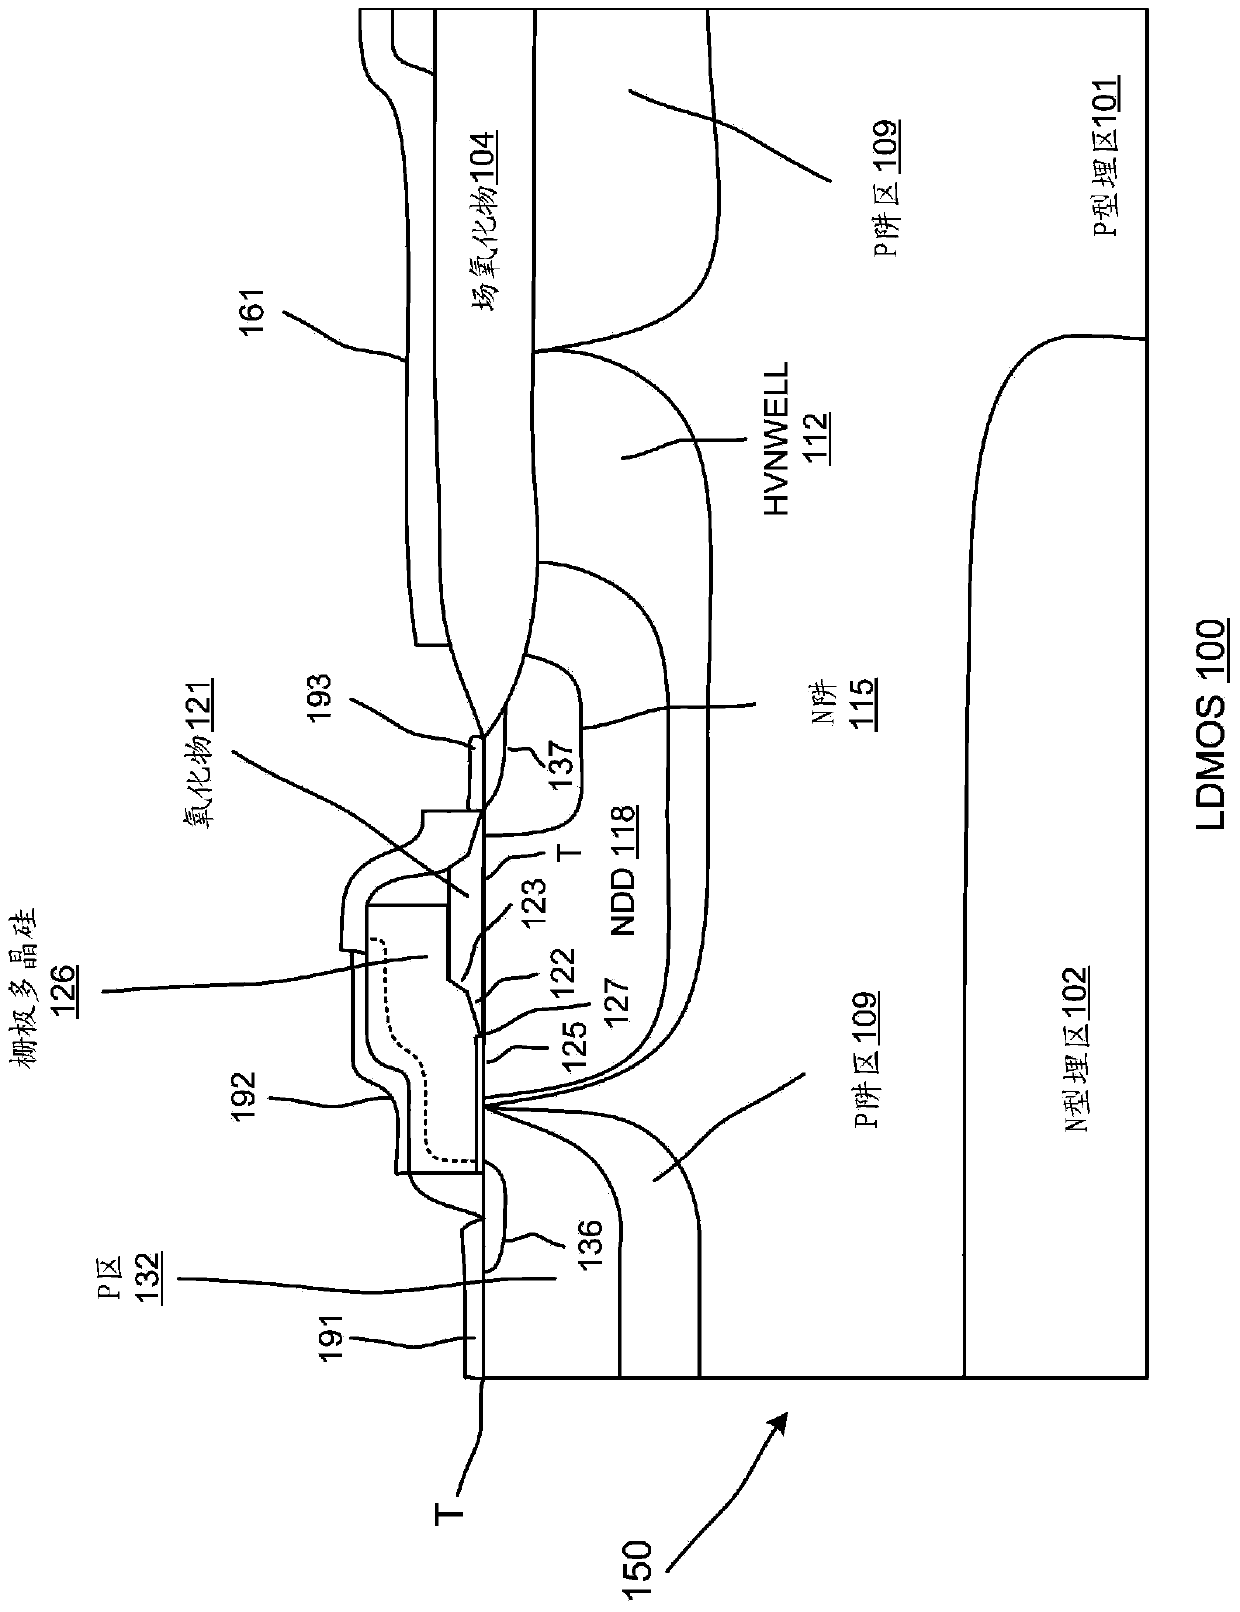 Ldmos device with double-sloped field plate